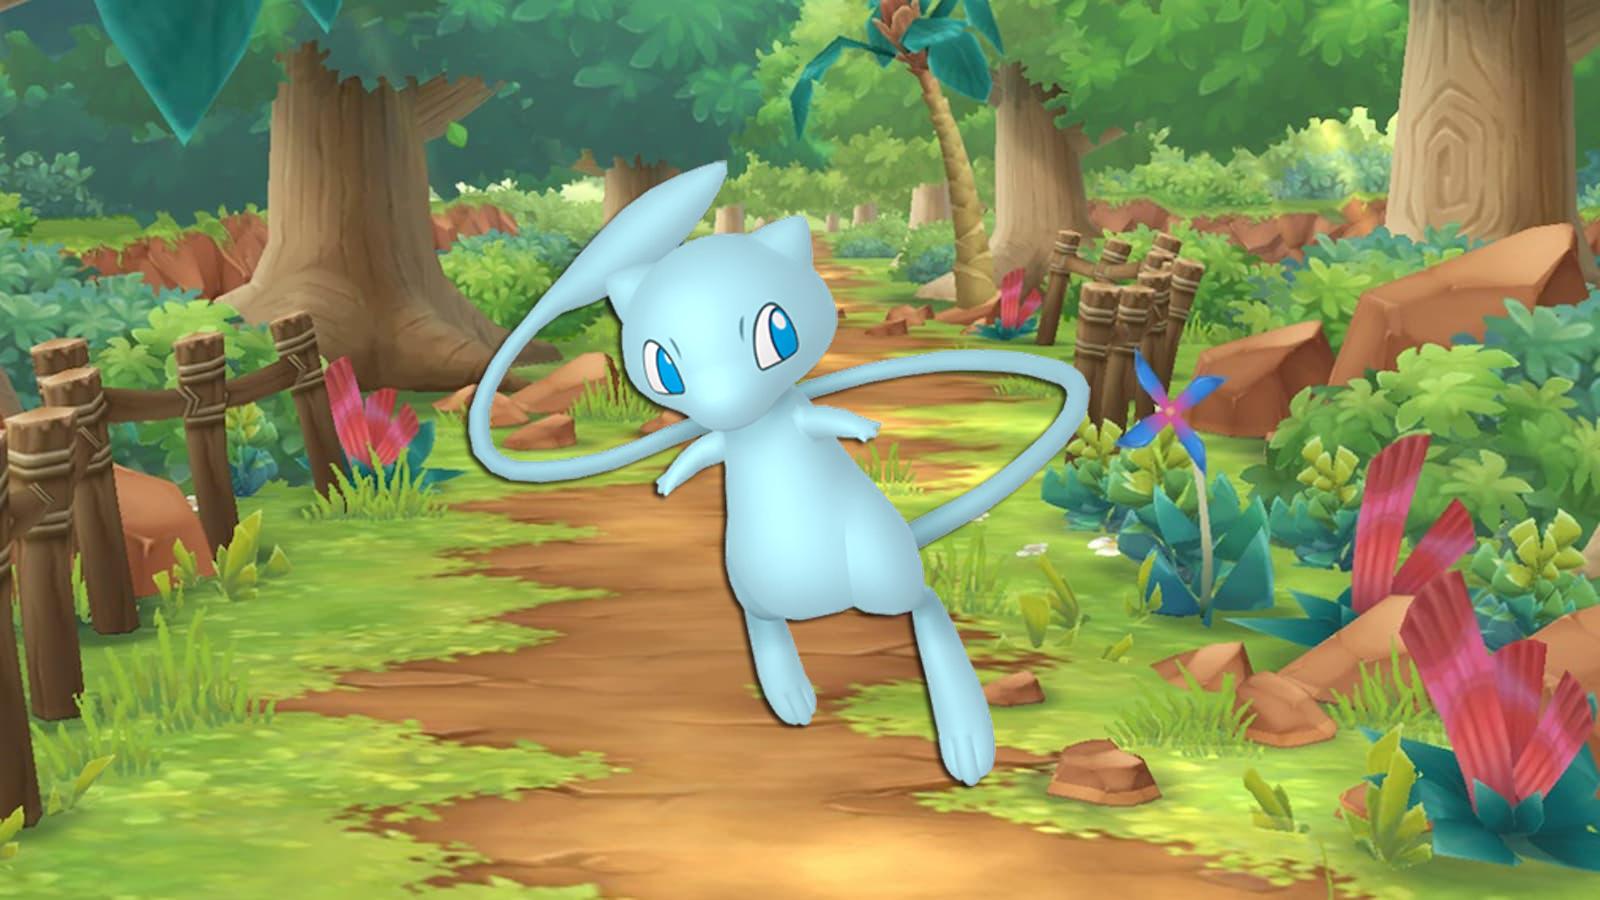 Pokemon Go's updated backgrounds are making it harder to Shiny hunt